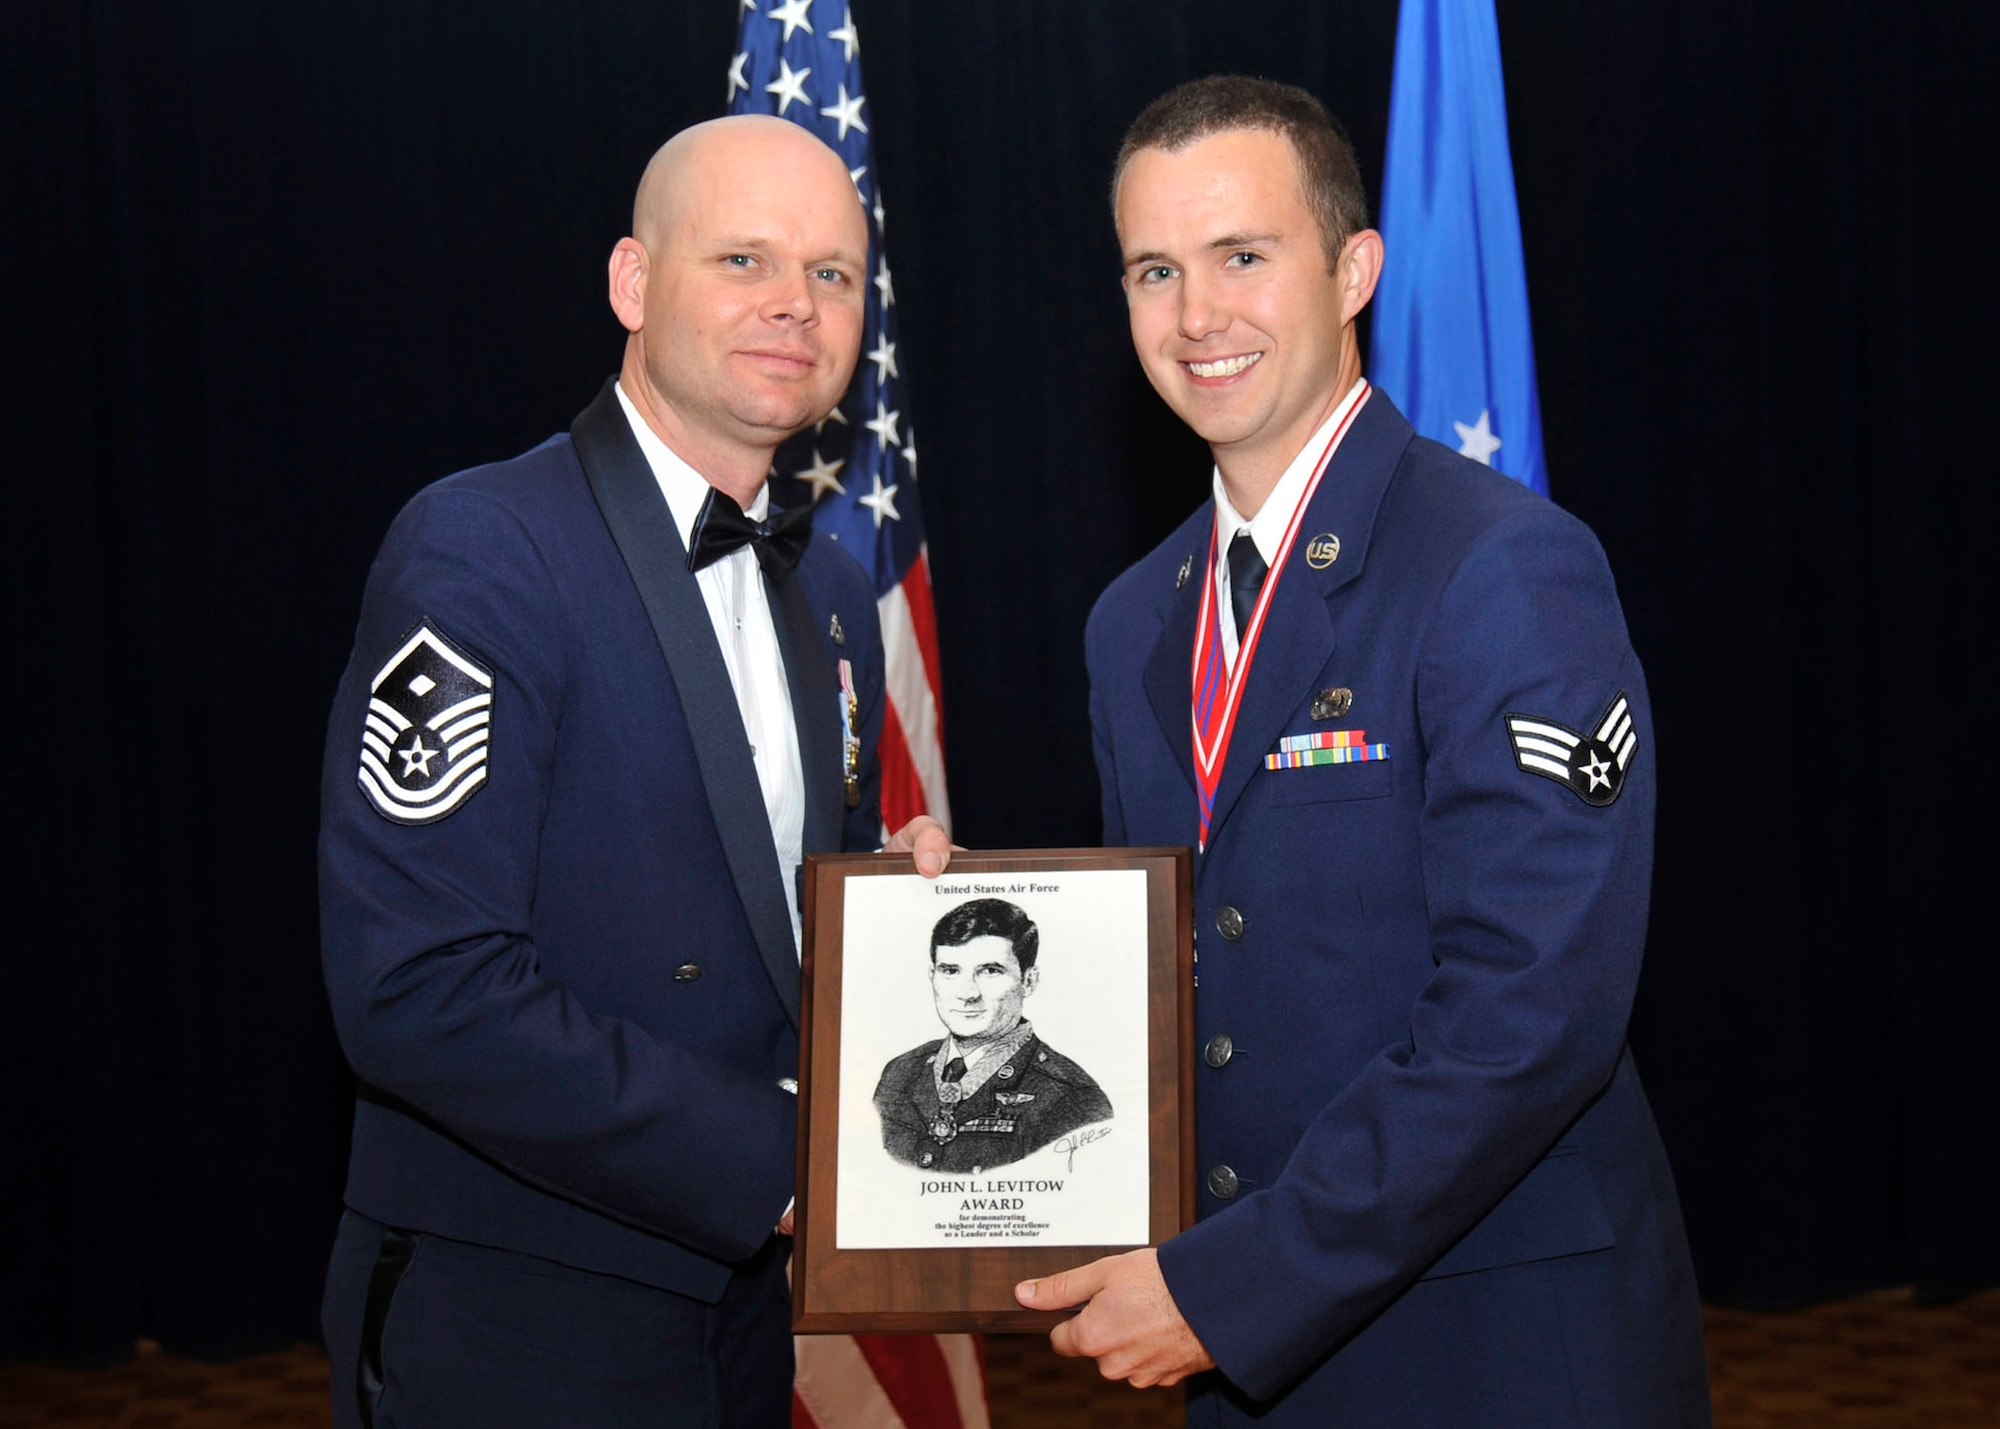 VANDENBERG AIR FORCE BASE, Calif. -- Master Sgt. Cecil Tonguet, 30th Security Forces Squadron first sergeant and guest speaker, presents Senior Airman Timothy Cram, 30th Comptroller Squadron lead defense travel administrator, with the distinguished John Levitow Award during an Airman Leadership School graduation ceremony here Thursday, 20 June. The John Levitow Award is the highest honor presented to a graduate of Air Force Enlisted Professional Military Education (PME), including Airman Leadership School, NCO Academy, and the Senior NCO Academy. (U.S. Air Force photo/Michael Peterson)